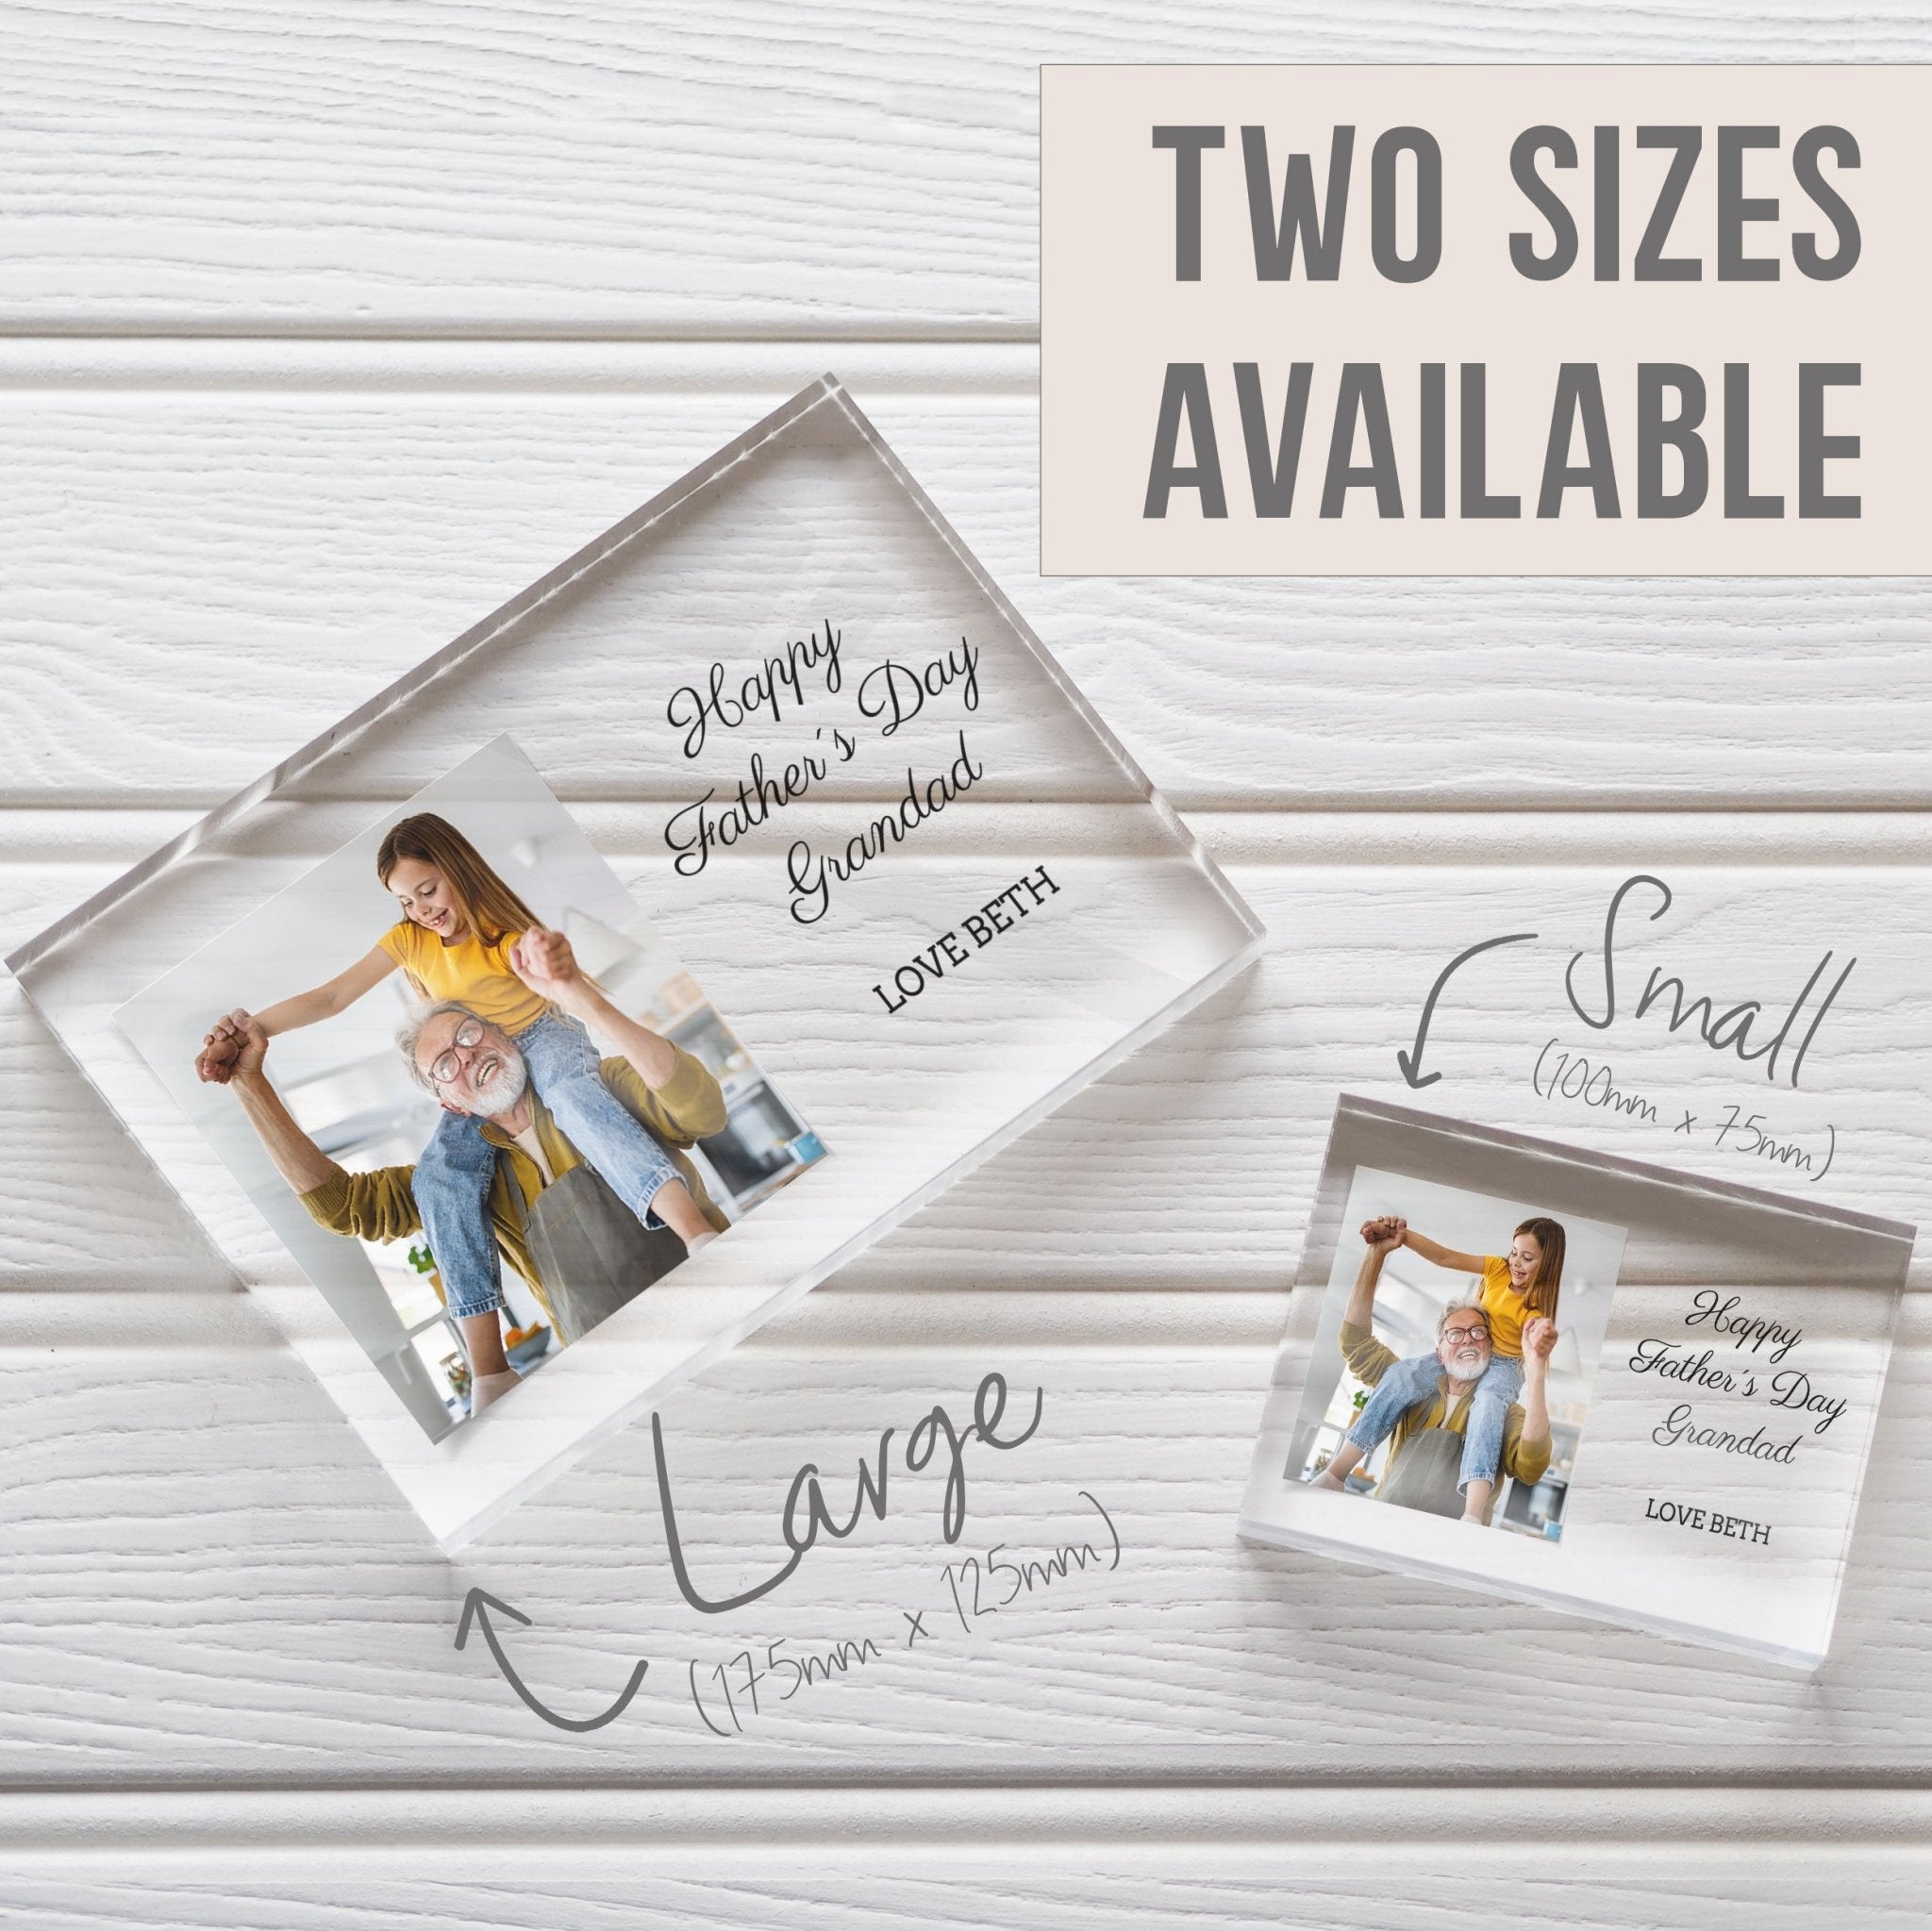 Happy Father's Day Grandad | Personalised Photo Frame | Gift For Him PhotoBlock - Unique Prints